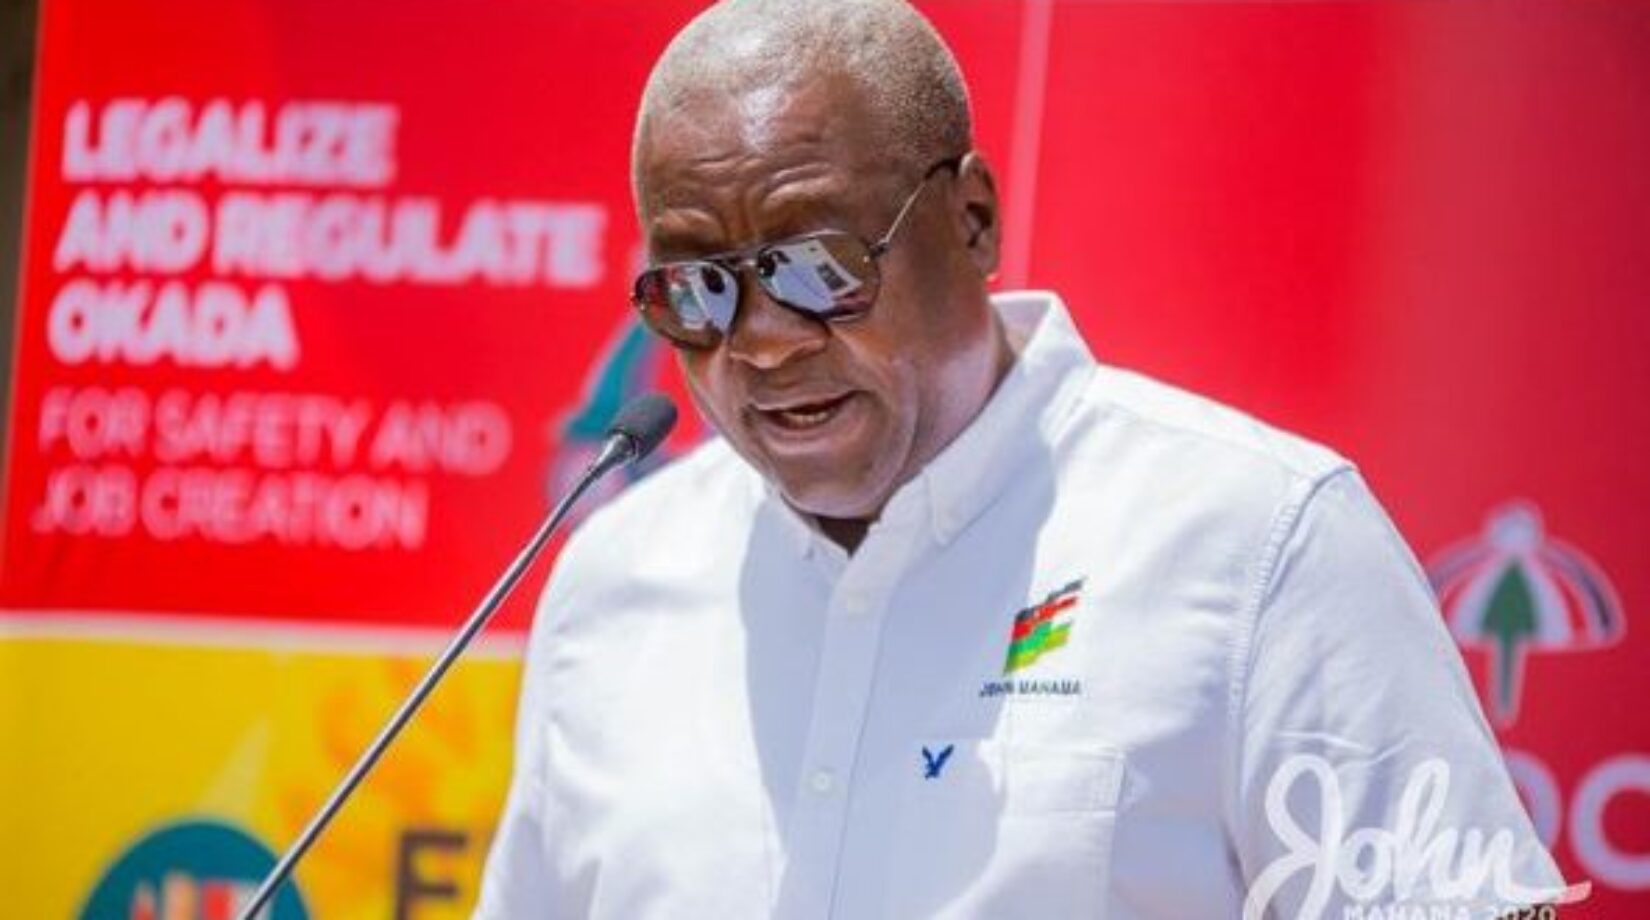 I’ll review Free SHS within 100 days – Mahama declares ahead of 2024 Polls